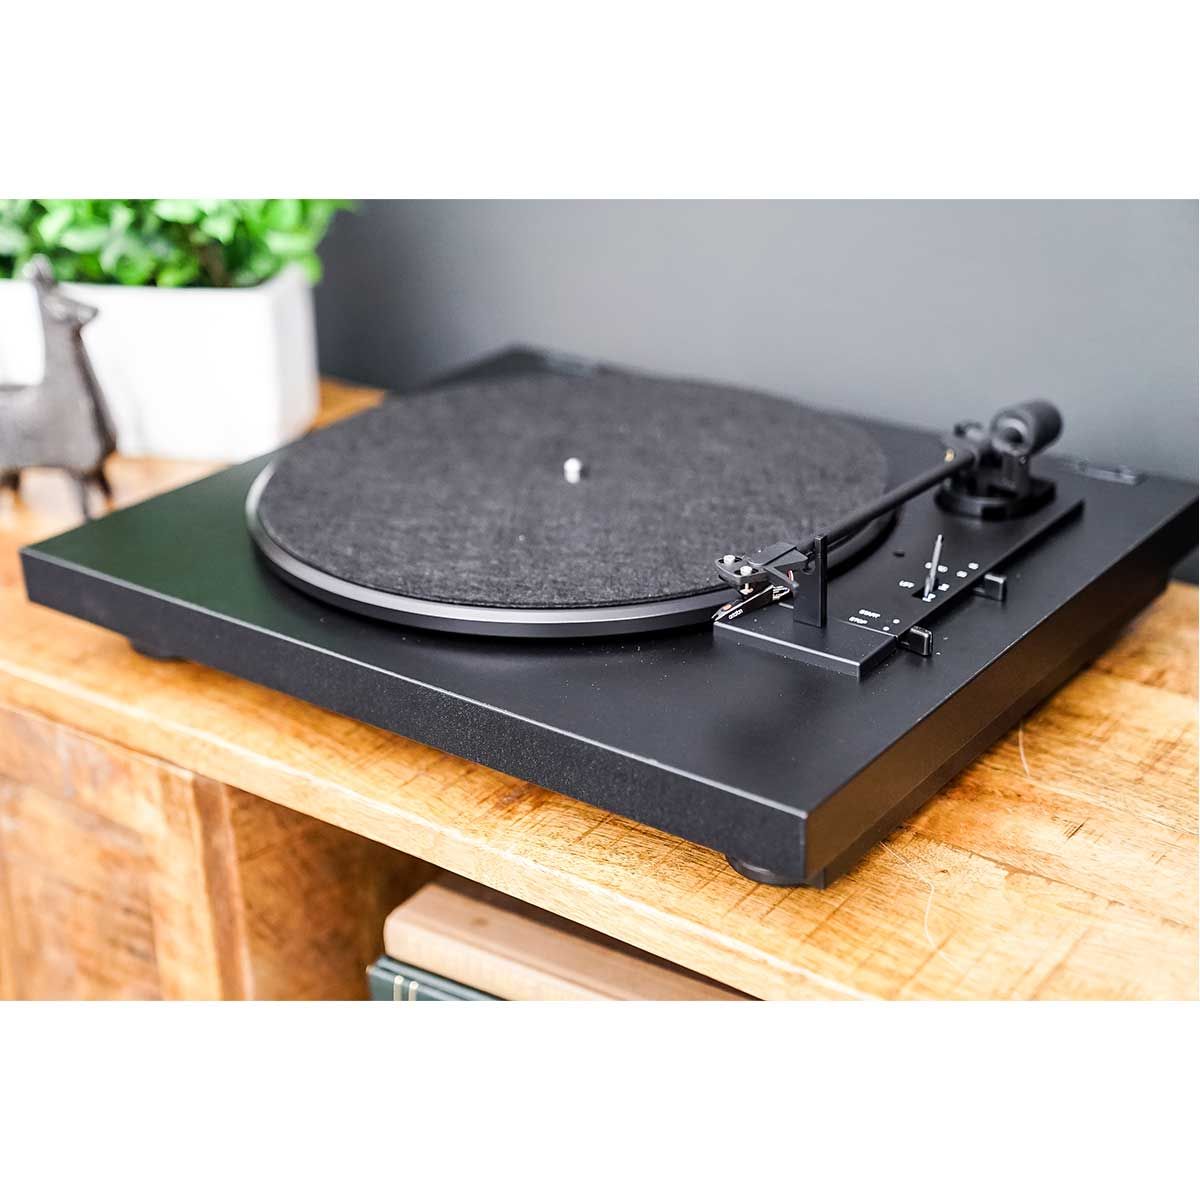 Pro-Ject Automat A1 Automatic Turntable on cabinet with felt mat and tonearm in place